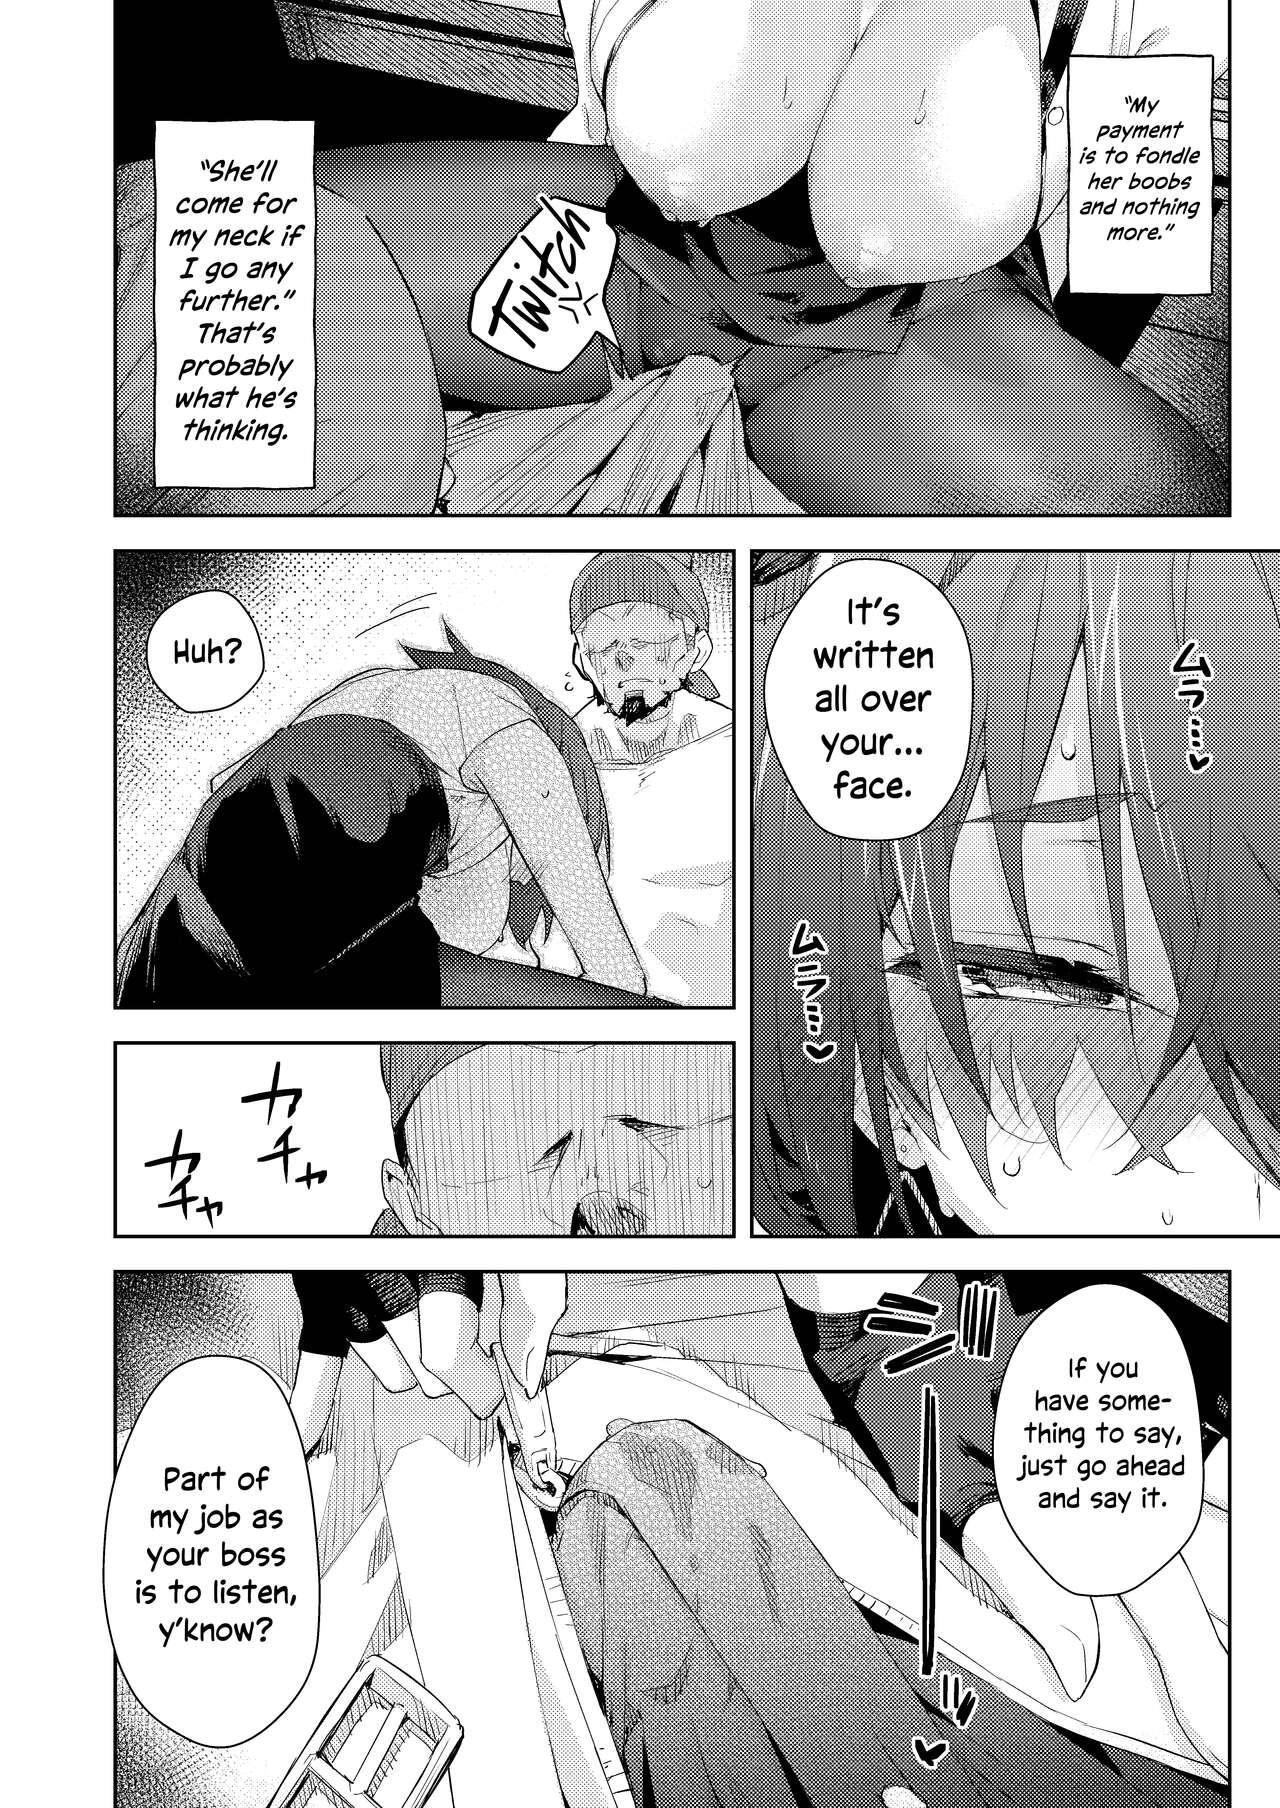 Cum In Mouth Kyuuryou wa Omune ja Dame desu ka? | Can I Pay You With My Breasts? - Hololive Women Fucking - Page 11